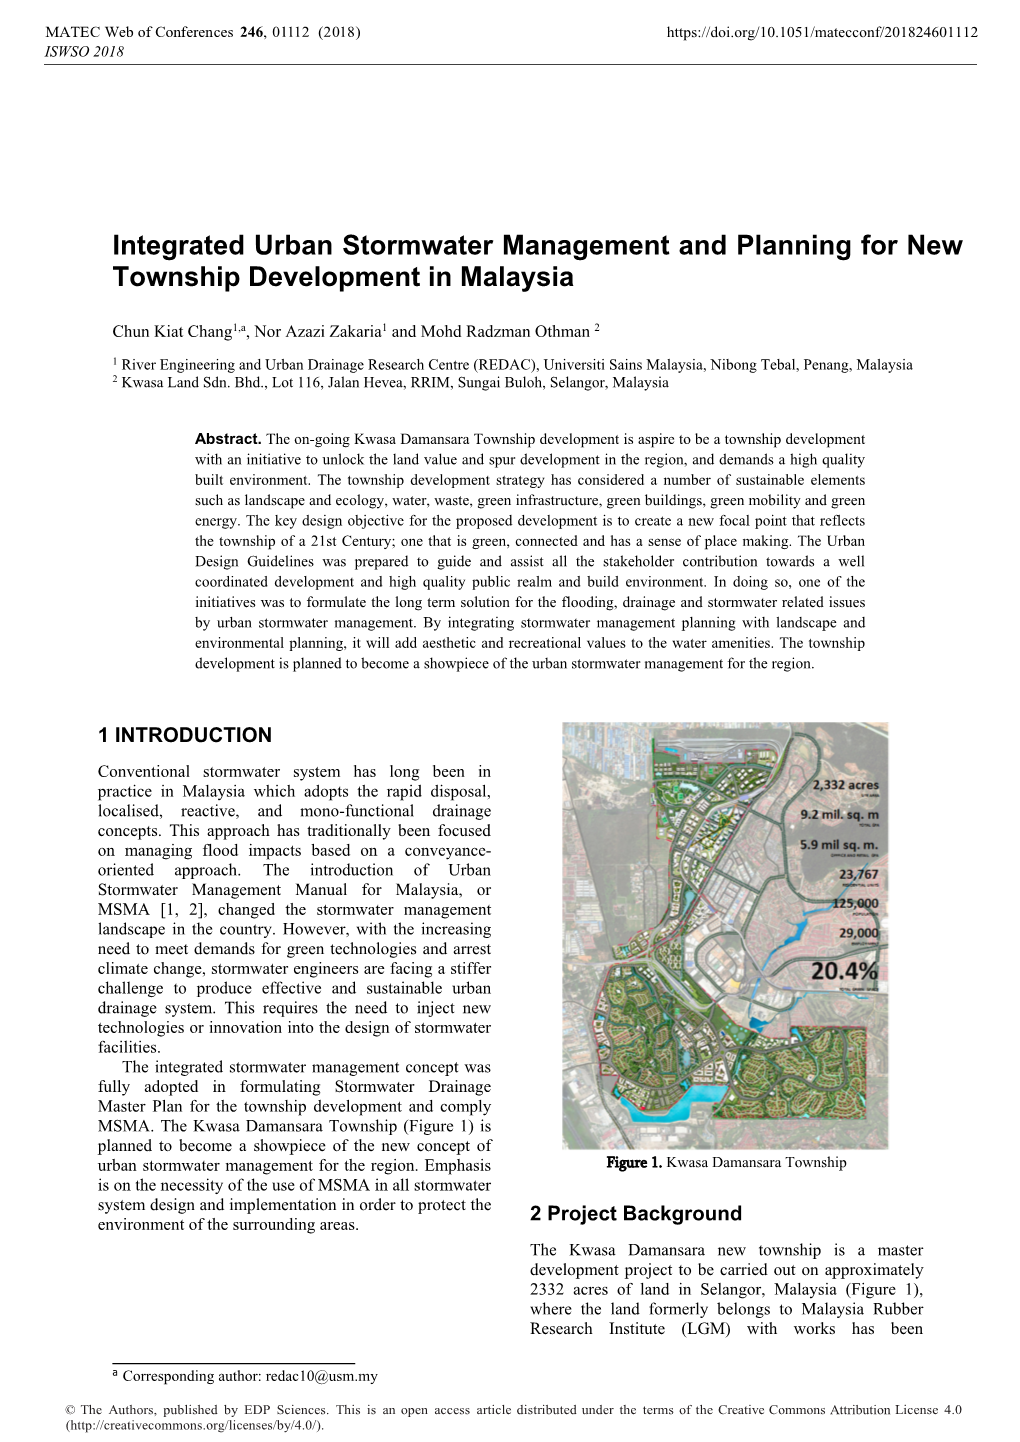 Integrated Urban Stormwater Management and Planning for New Township Development in Malaysia